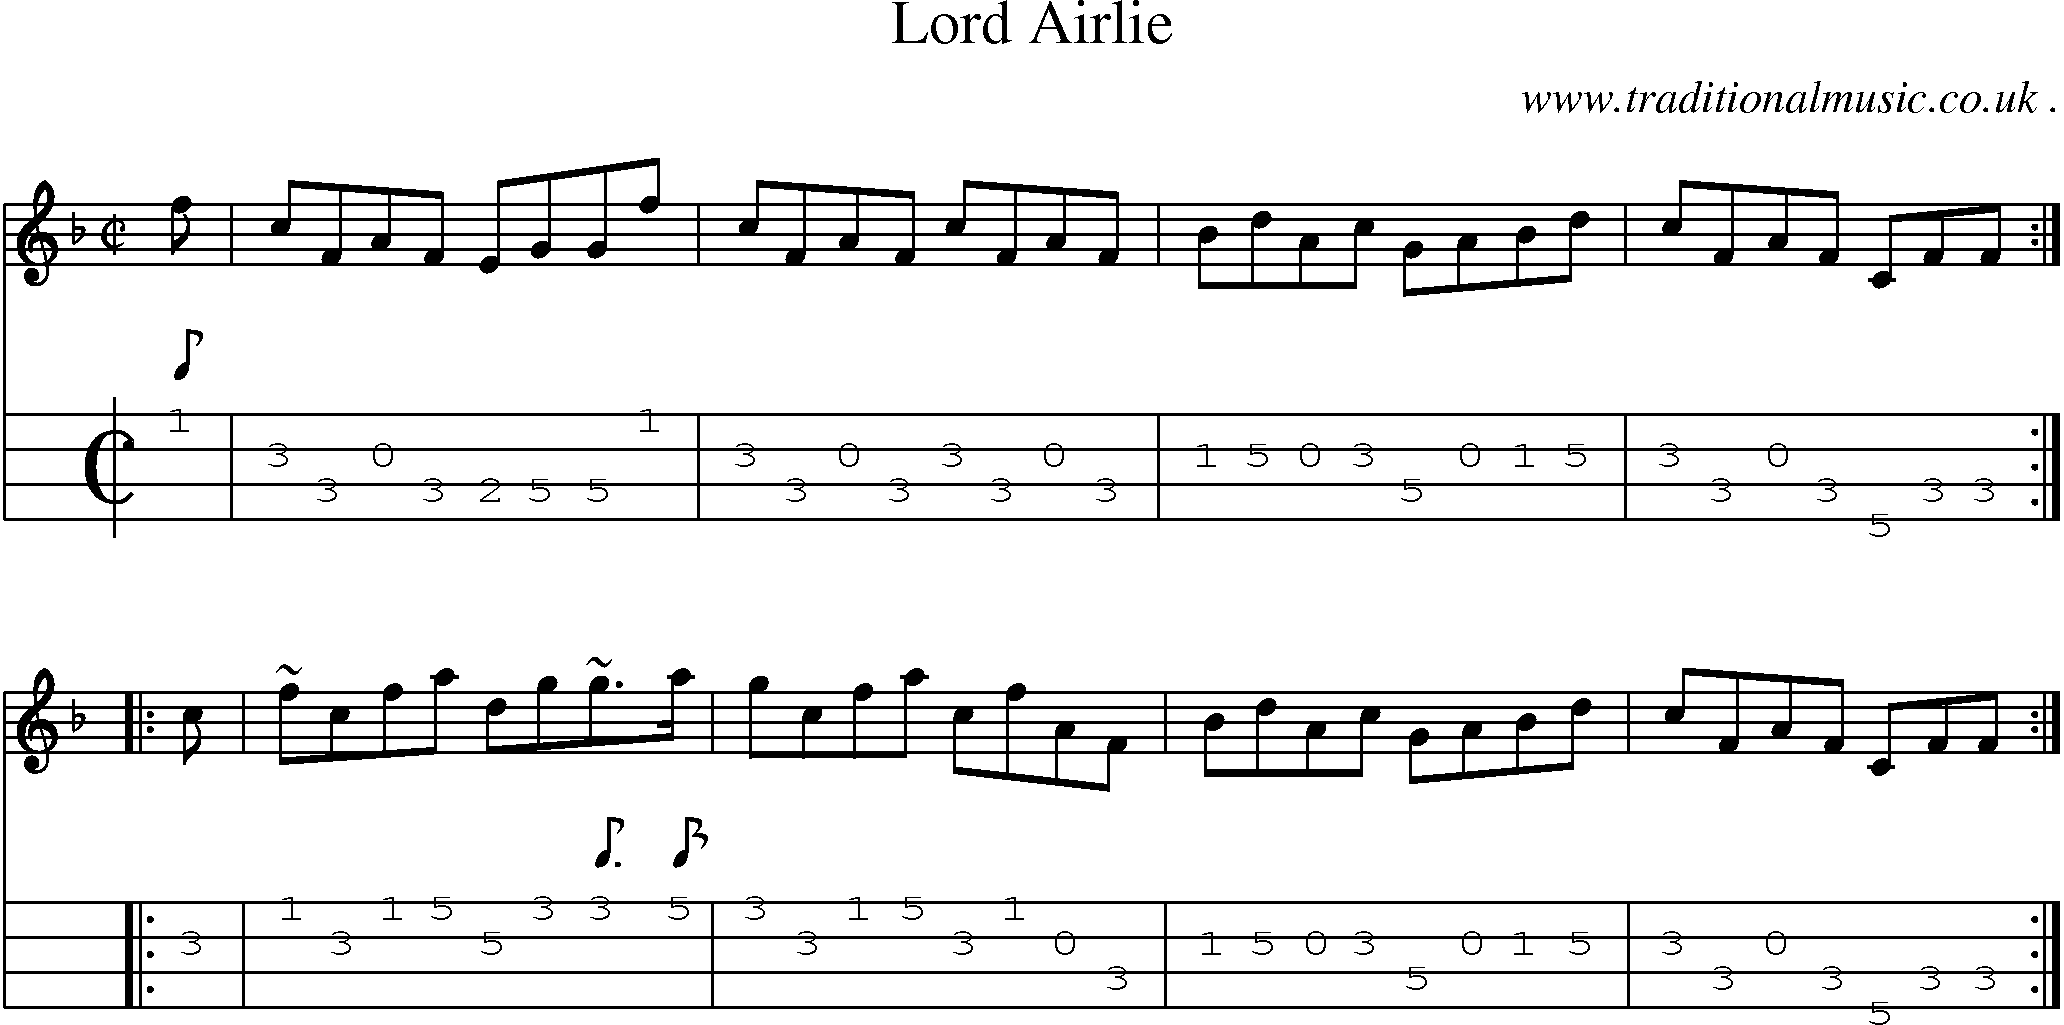 Sheet-music  score, Chords and Mandolin Tabs for Lord Airlie